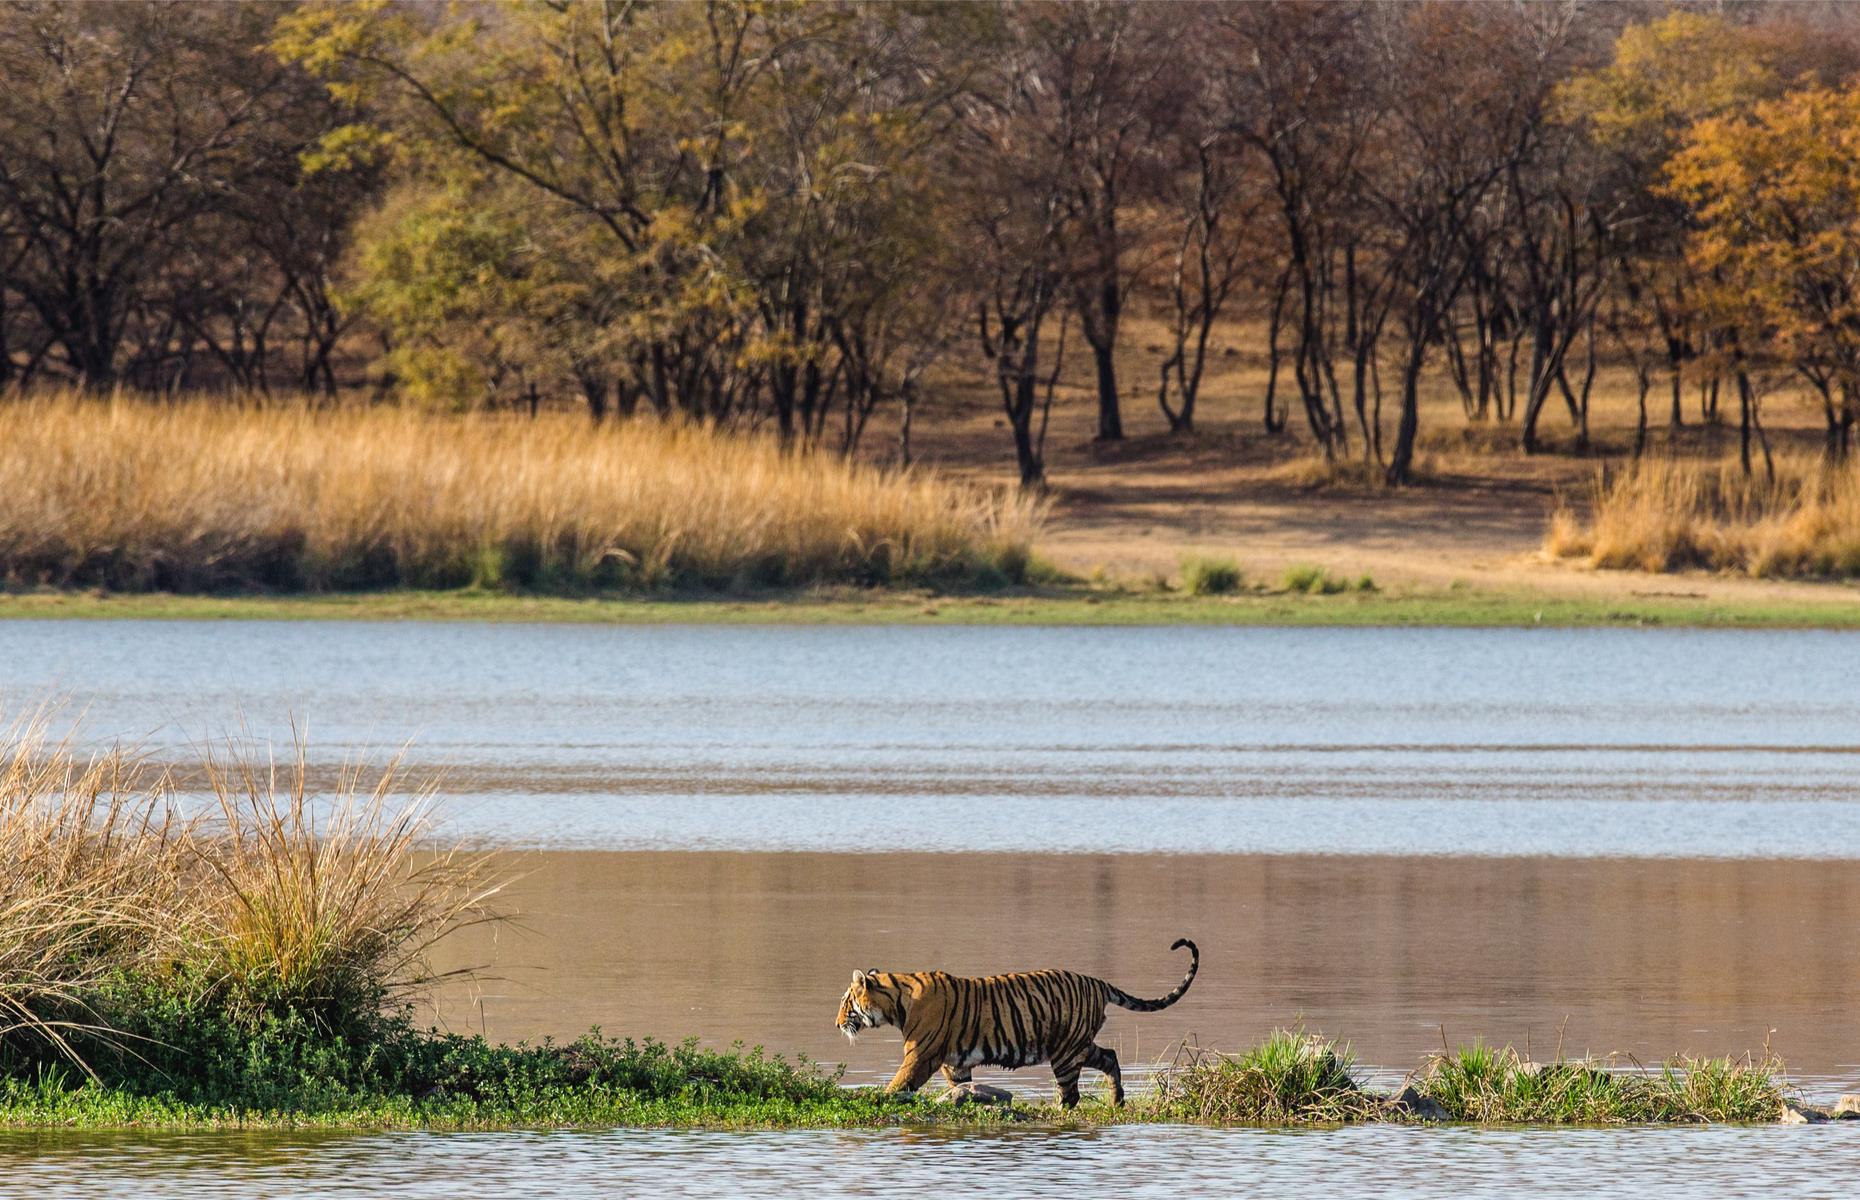 <p>Catching a glimpse of a Bengal tiger is one of India's most beguiling experiences. The chances of seeing one in the wild are extremely slim, but Ranthambore is one of the best places to try.</p>  <p>The national park’s gorges, ridges, lakes, and jungles also conceal other predators such as panthers, hyenas, jackals, and crocodiles.</p>